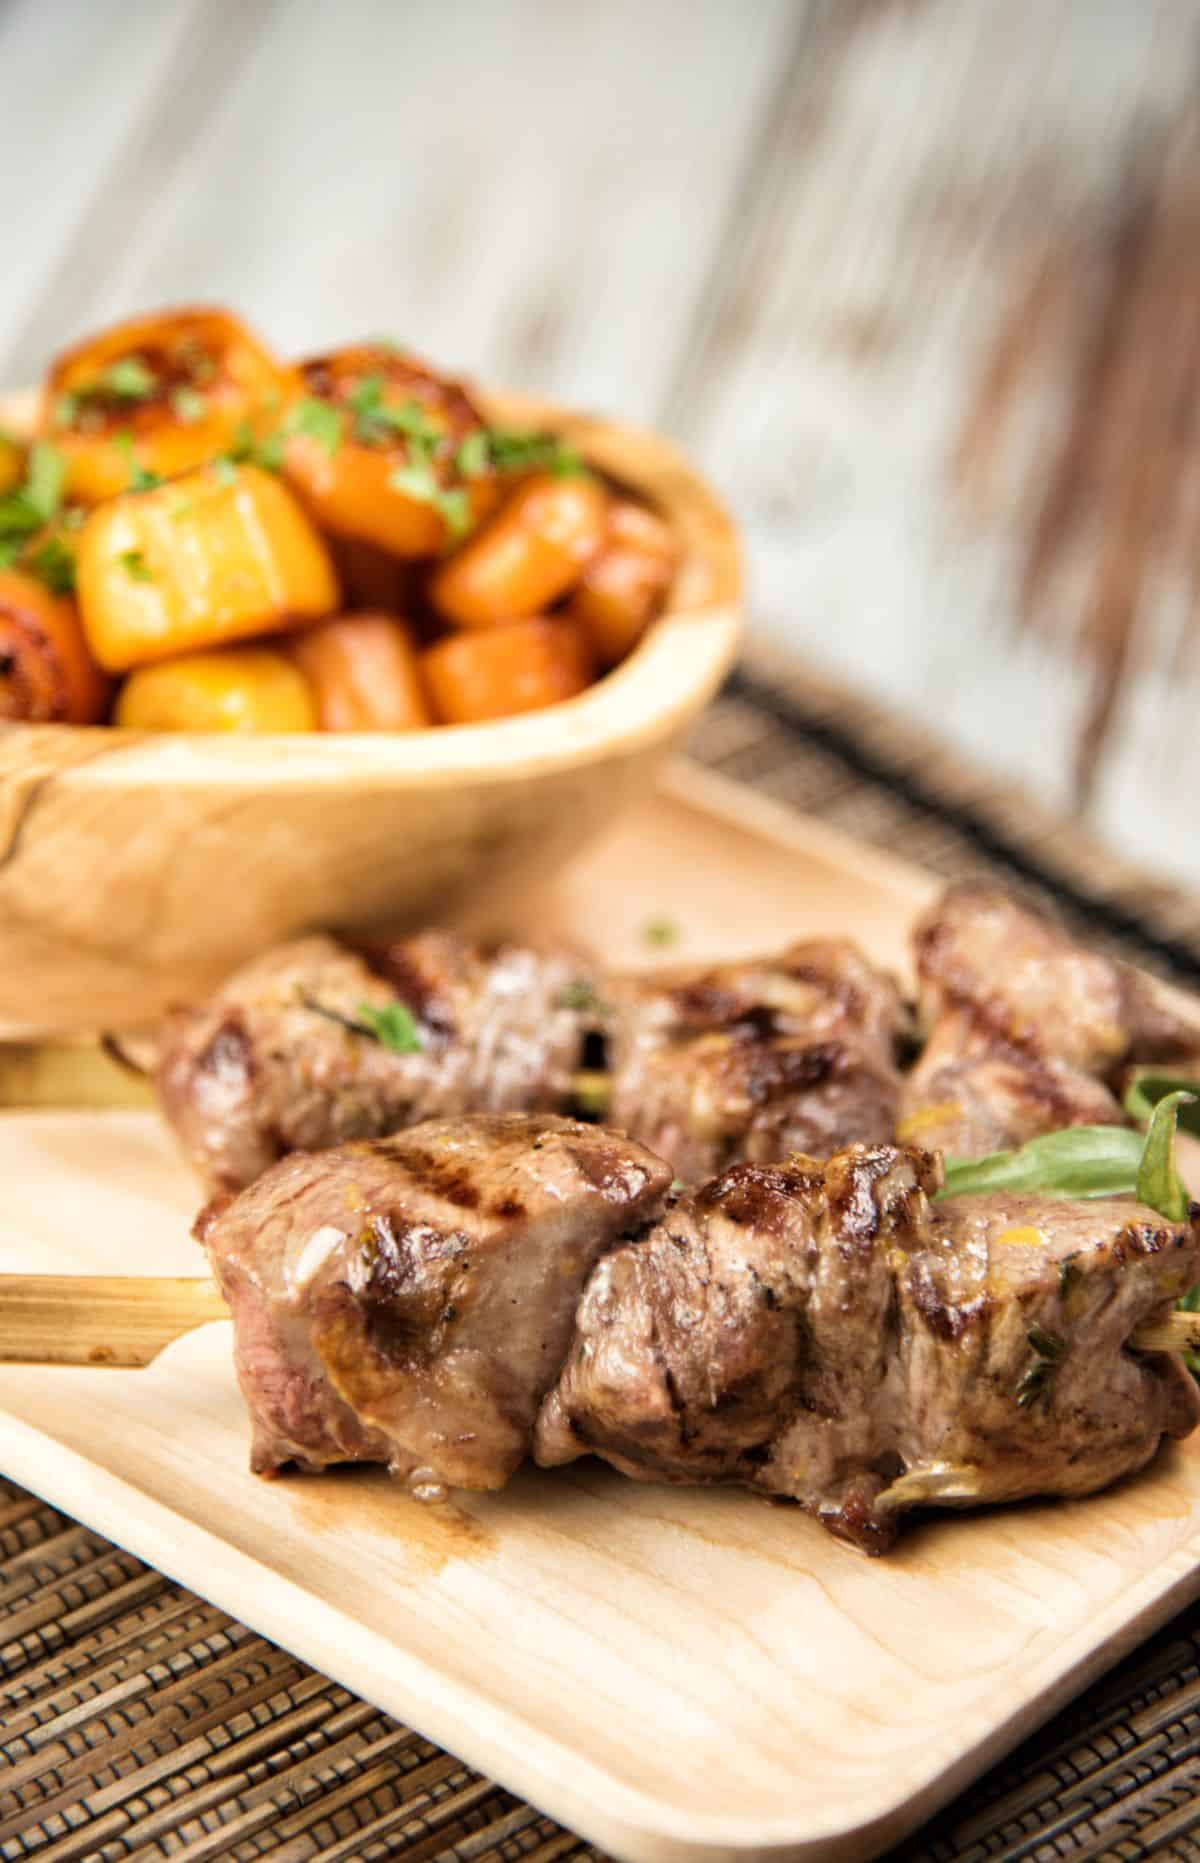 Skewered Lamb with Honey Glazed Carrots on a wooden cutting board.